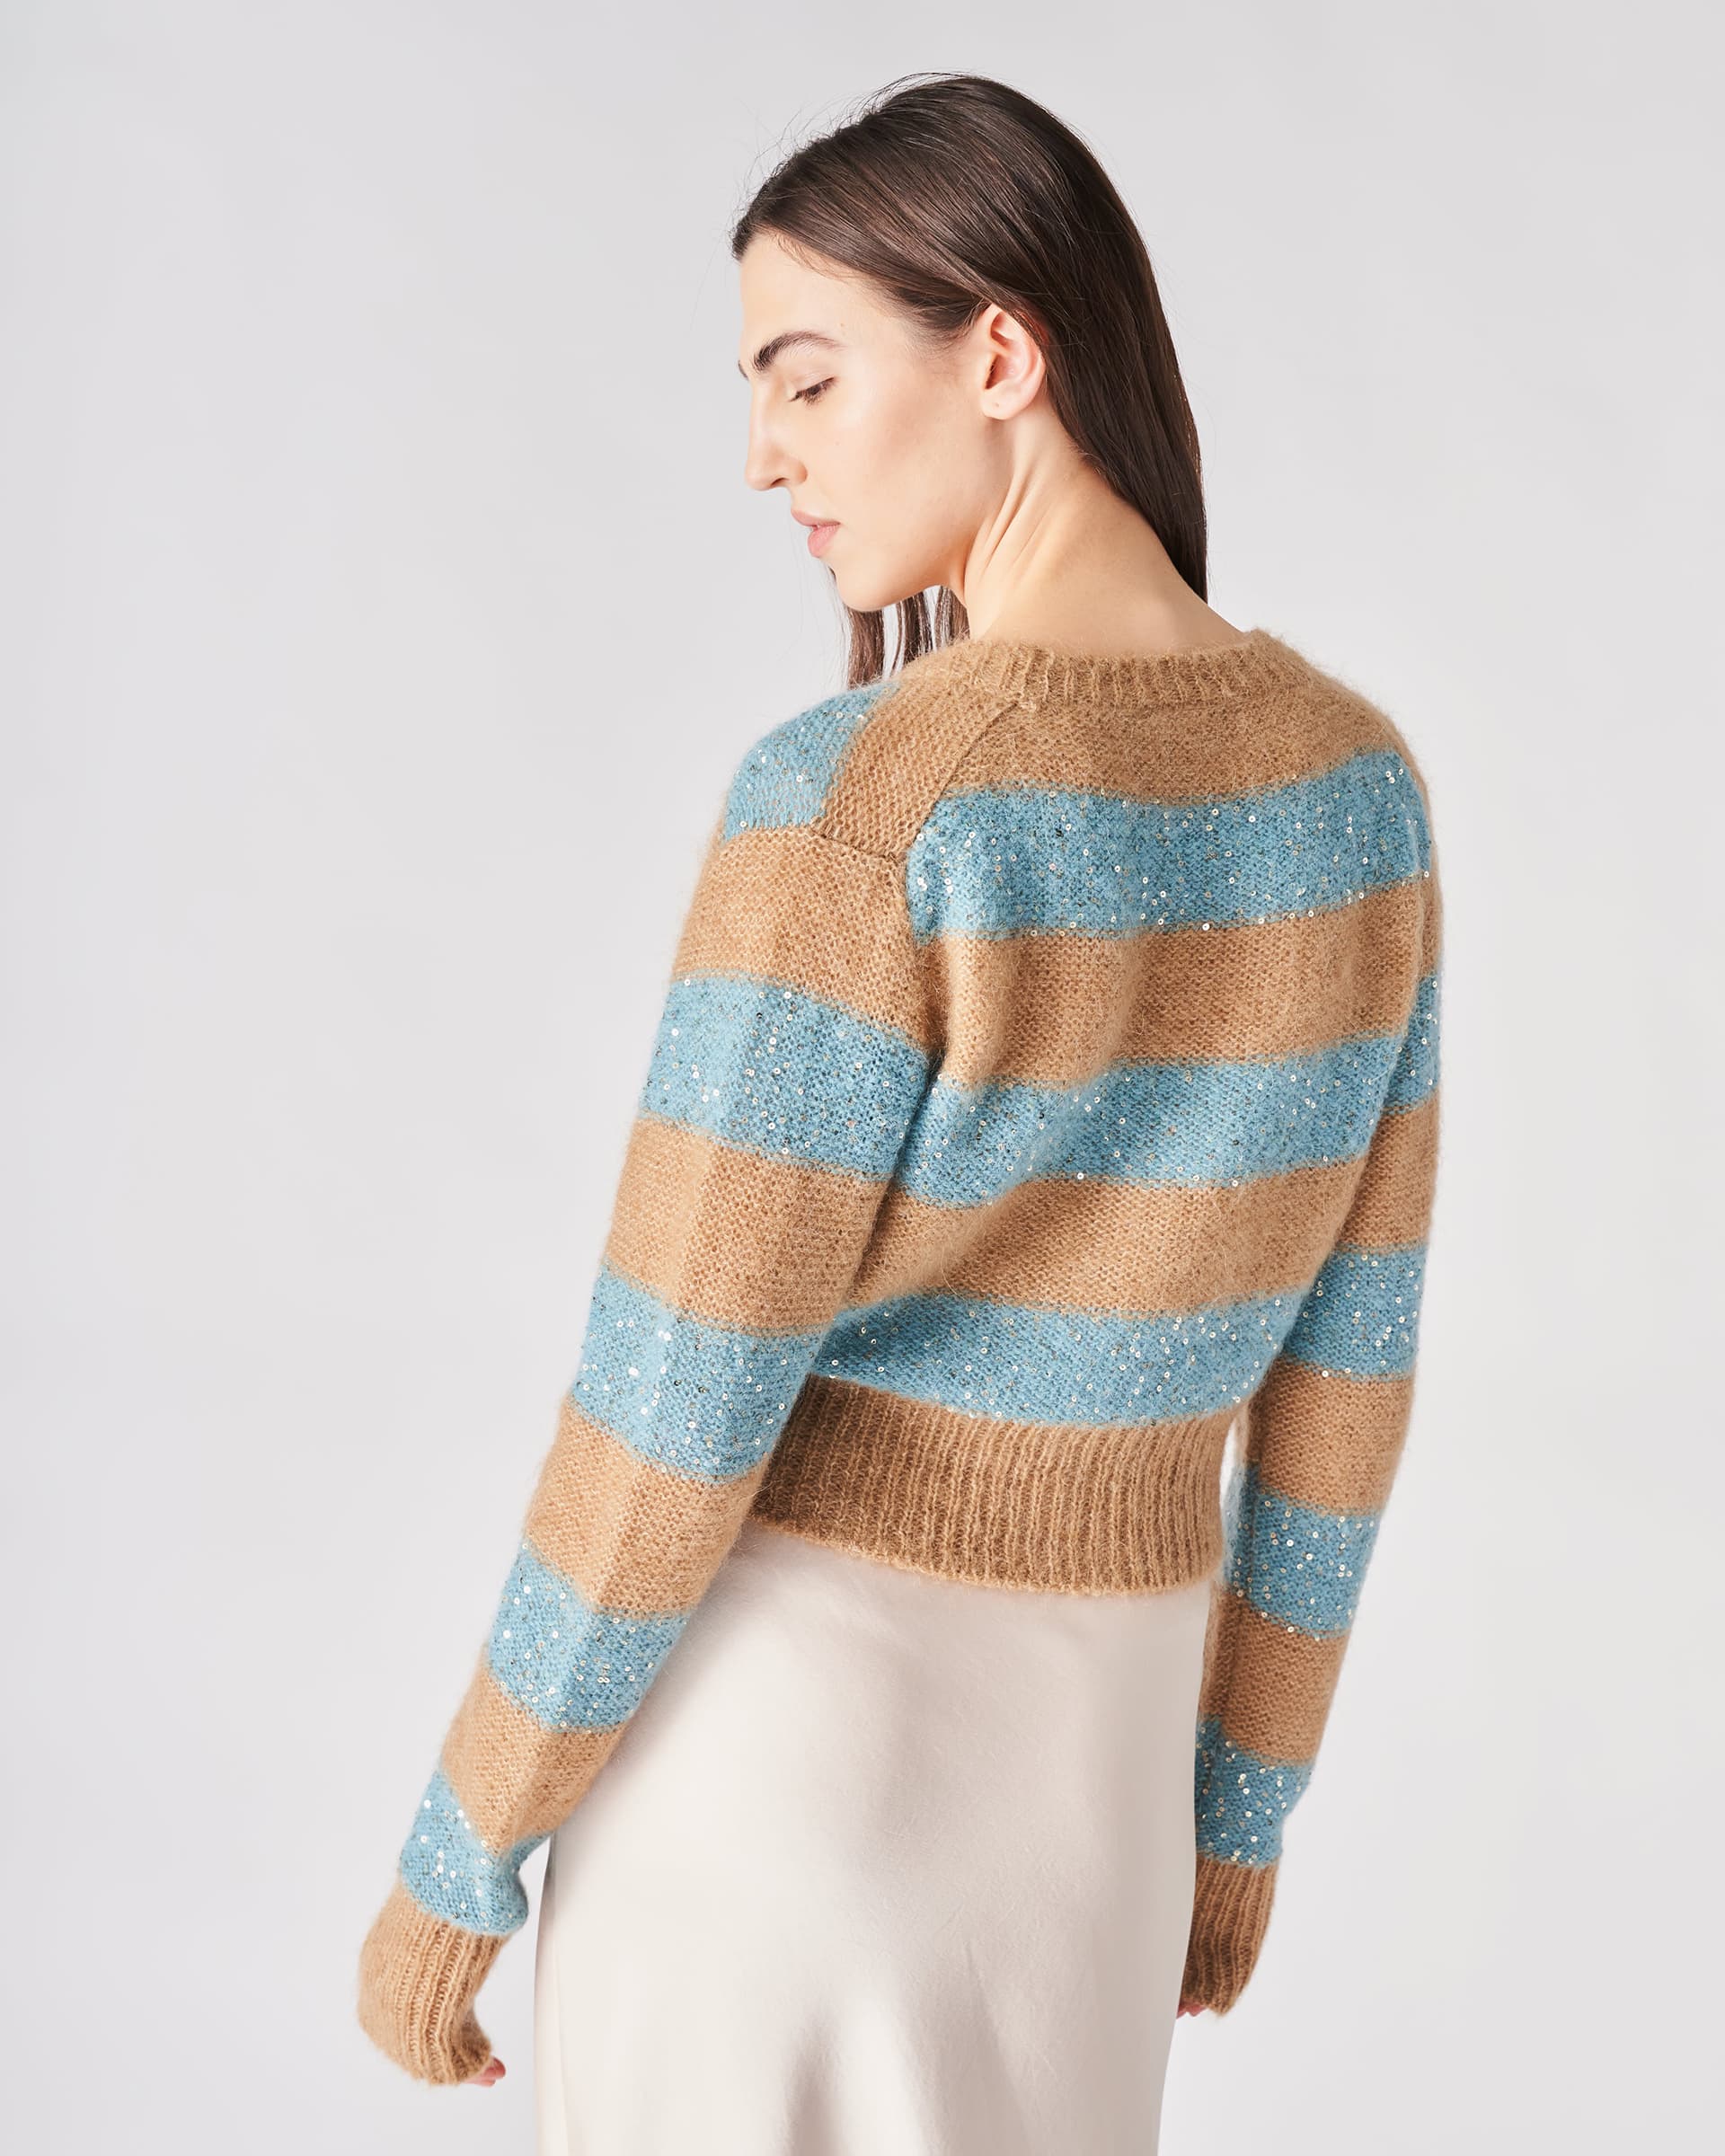 The Market Store | Striped Knit Cardigan With Sequins